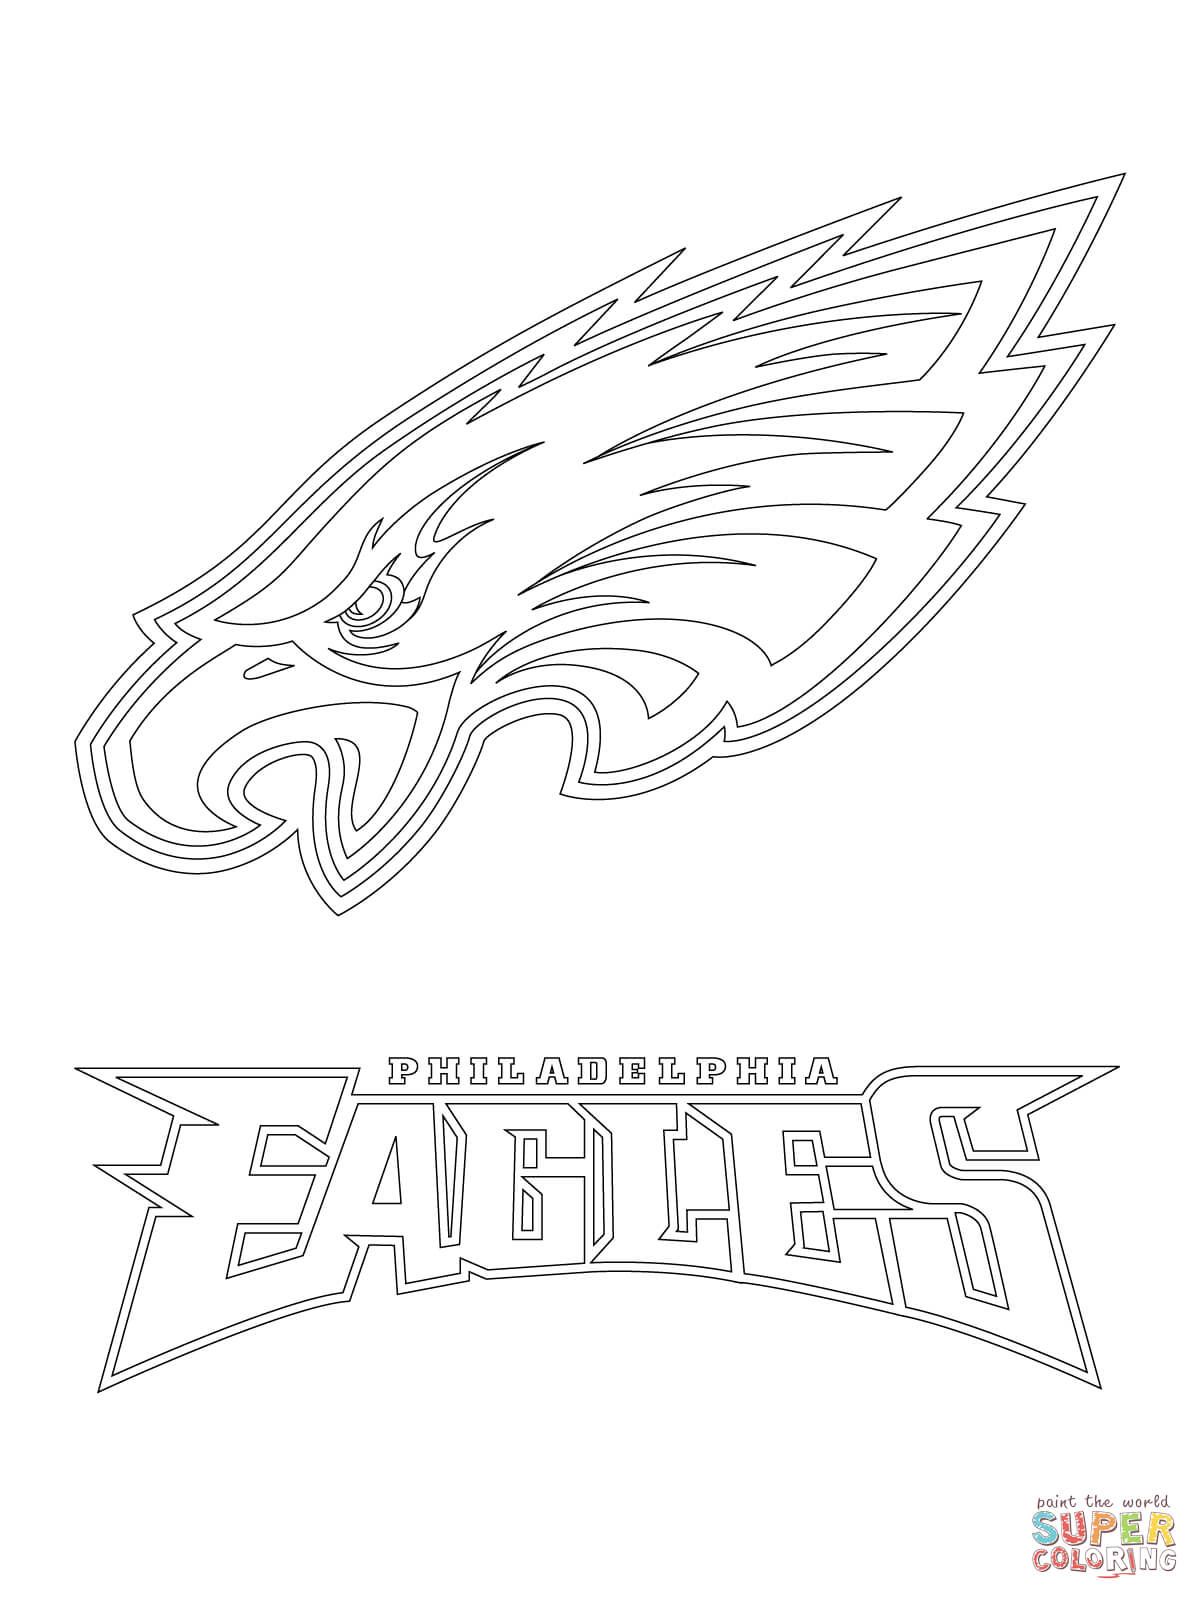 Philadelphia eagles logo coloring page free printable coloring pages